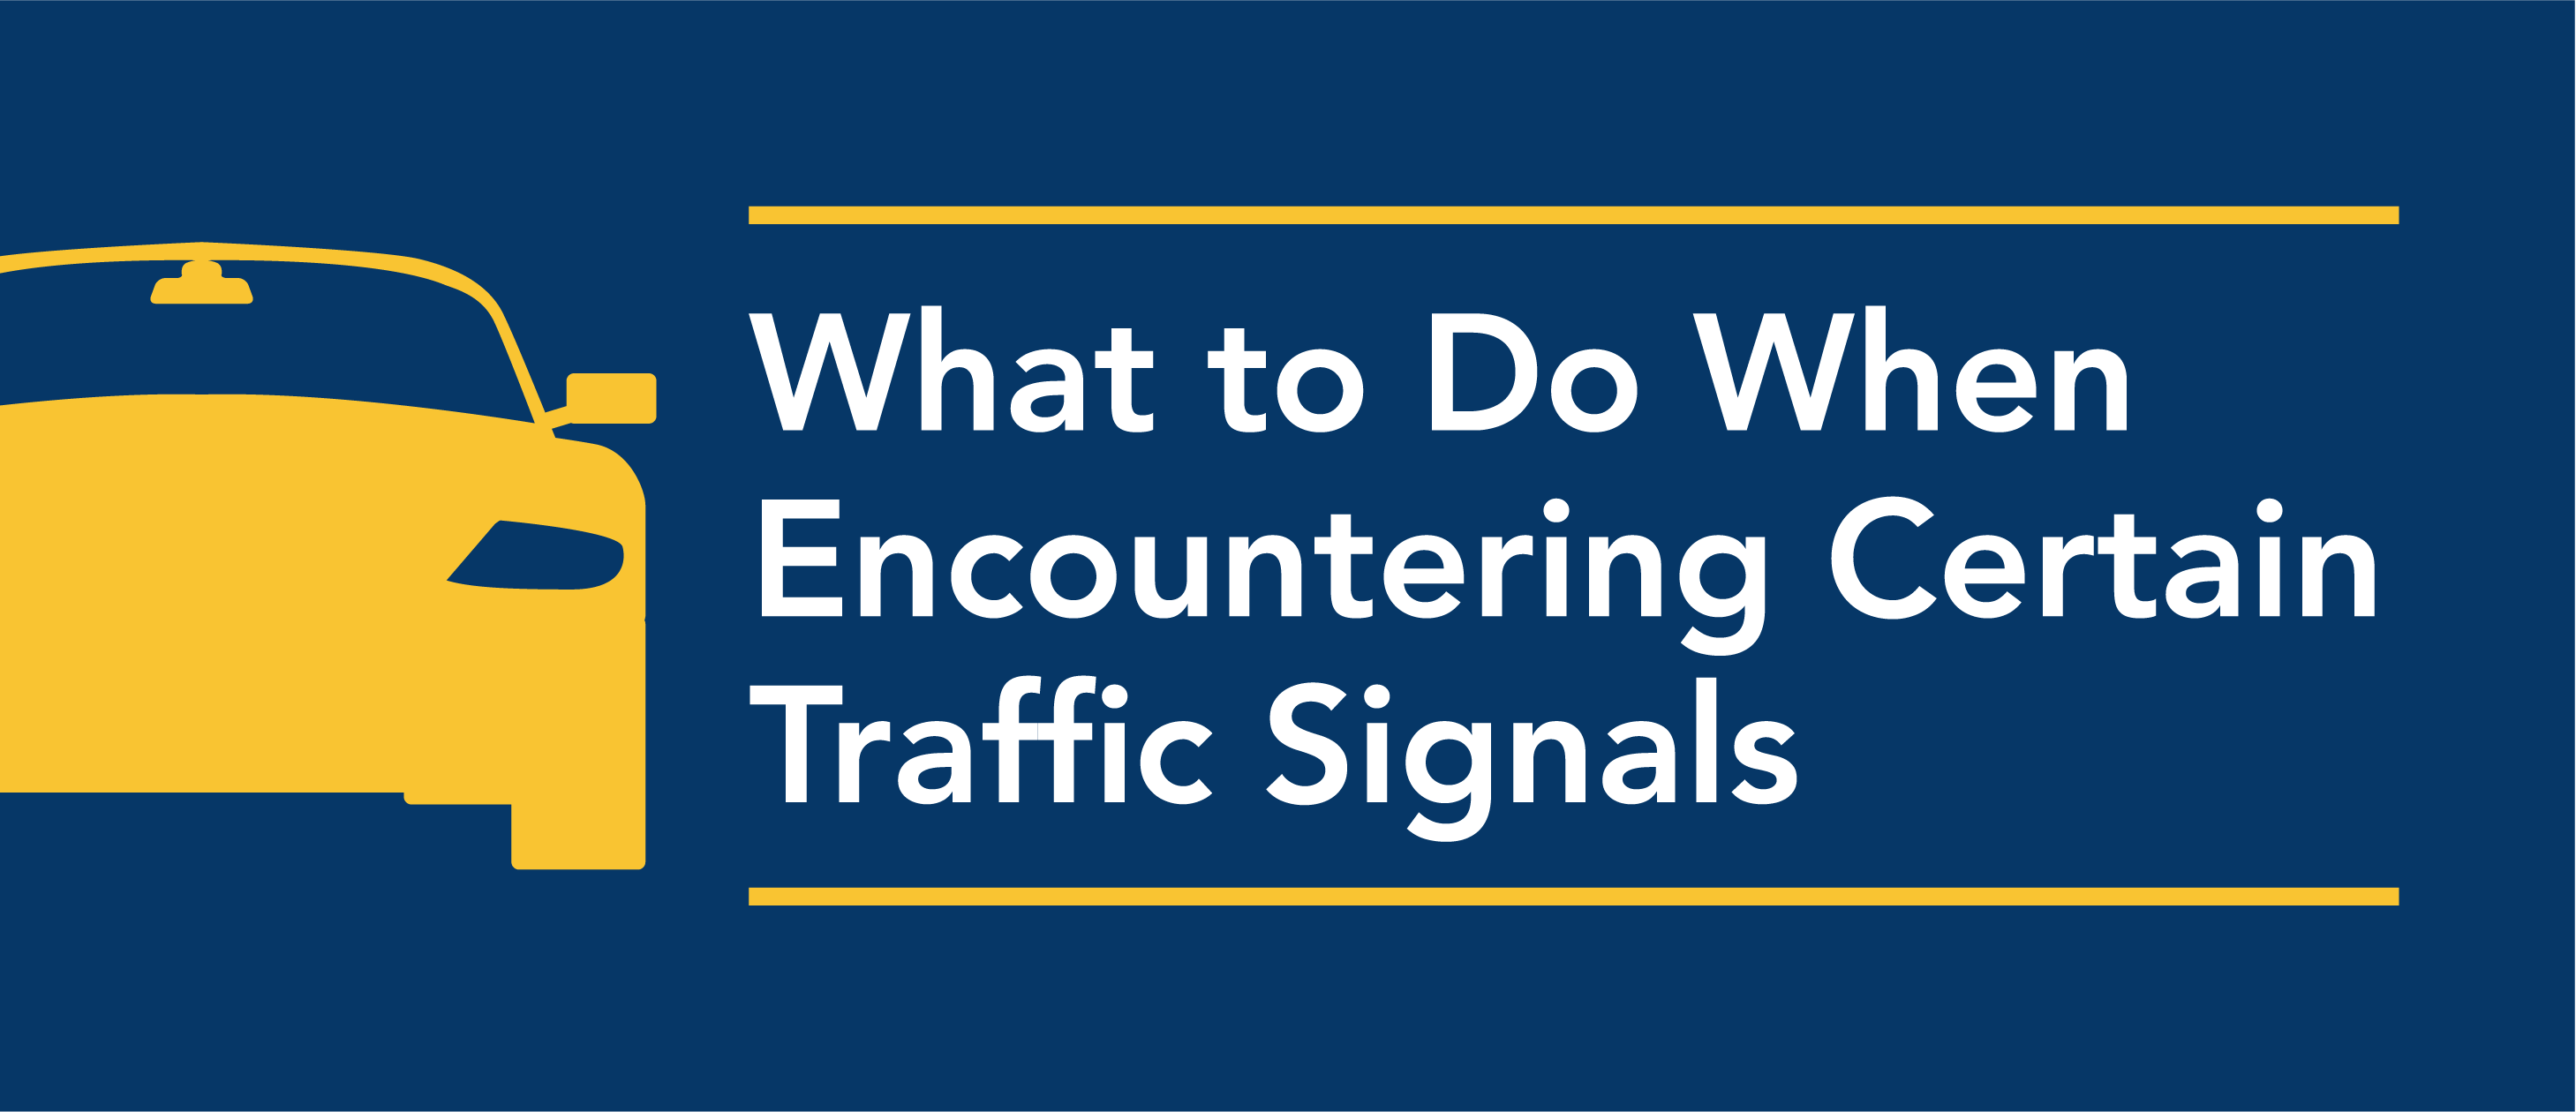 what to do when encountering traffic signals